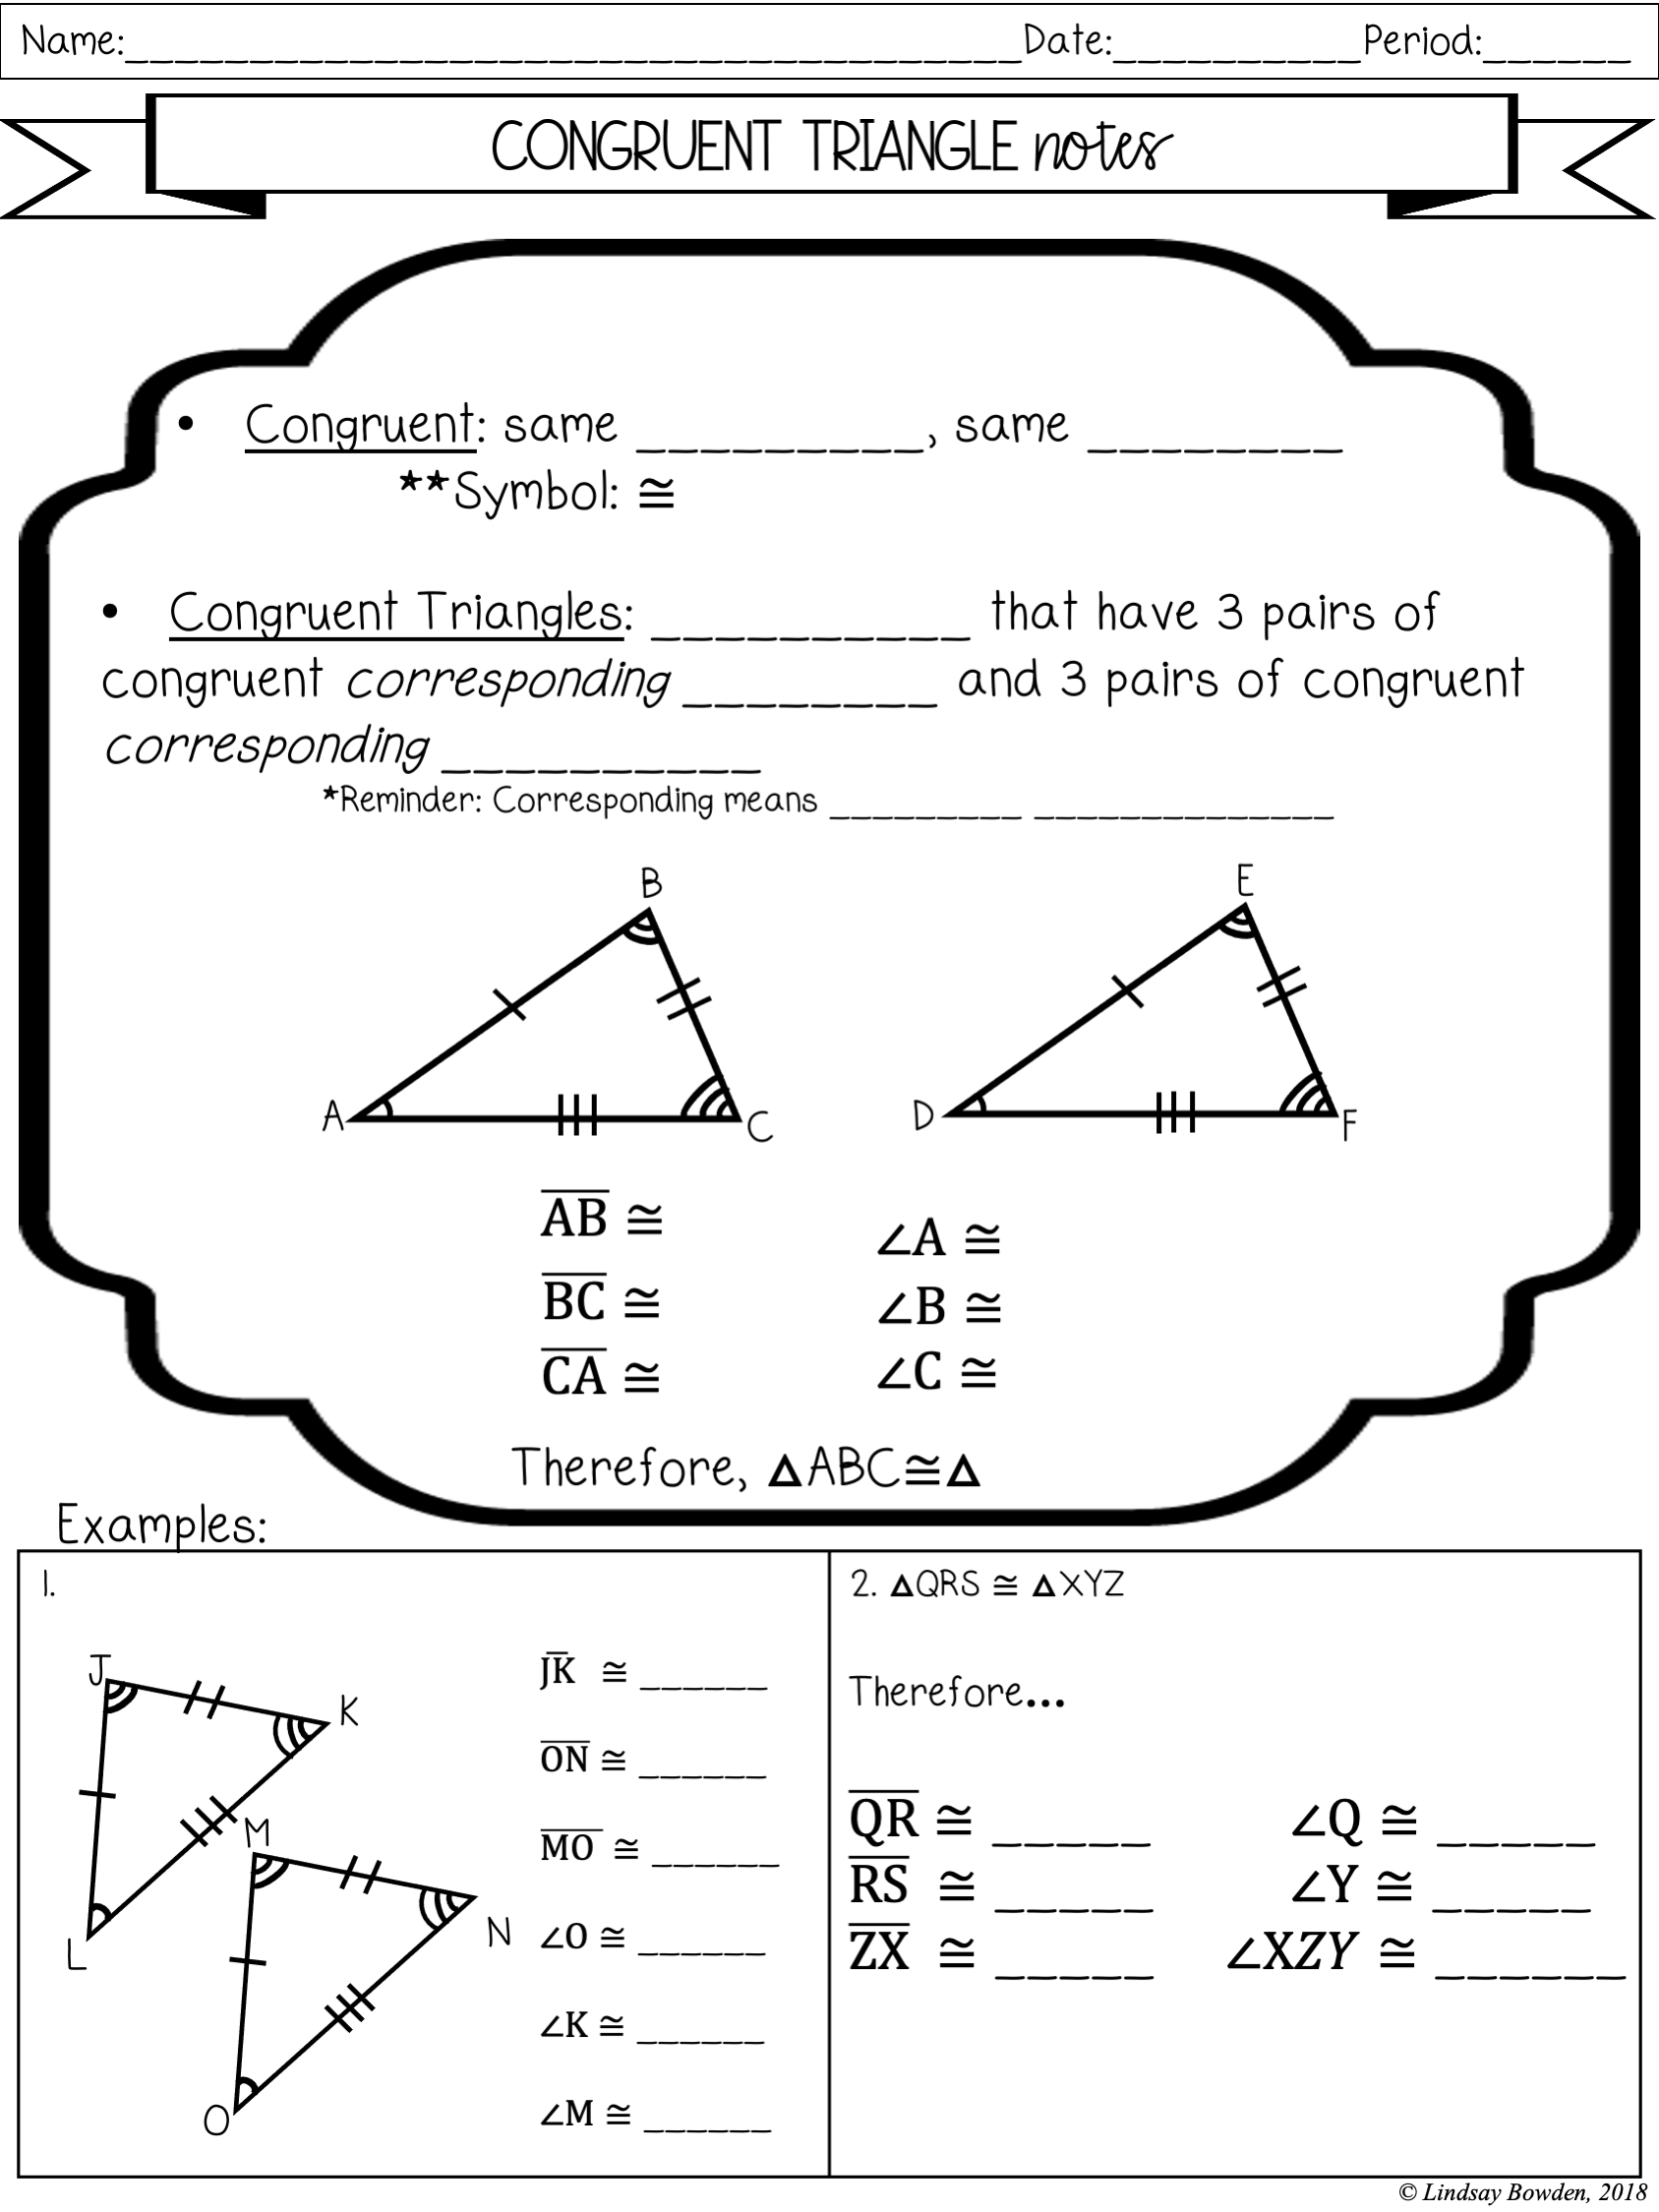 Congruent Triangles Notes and Worksheets - Lindsay Bowden Intended For Congruent Triangles Worksheet Answers